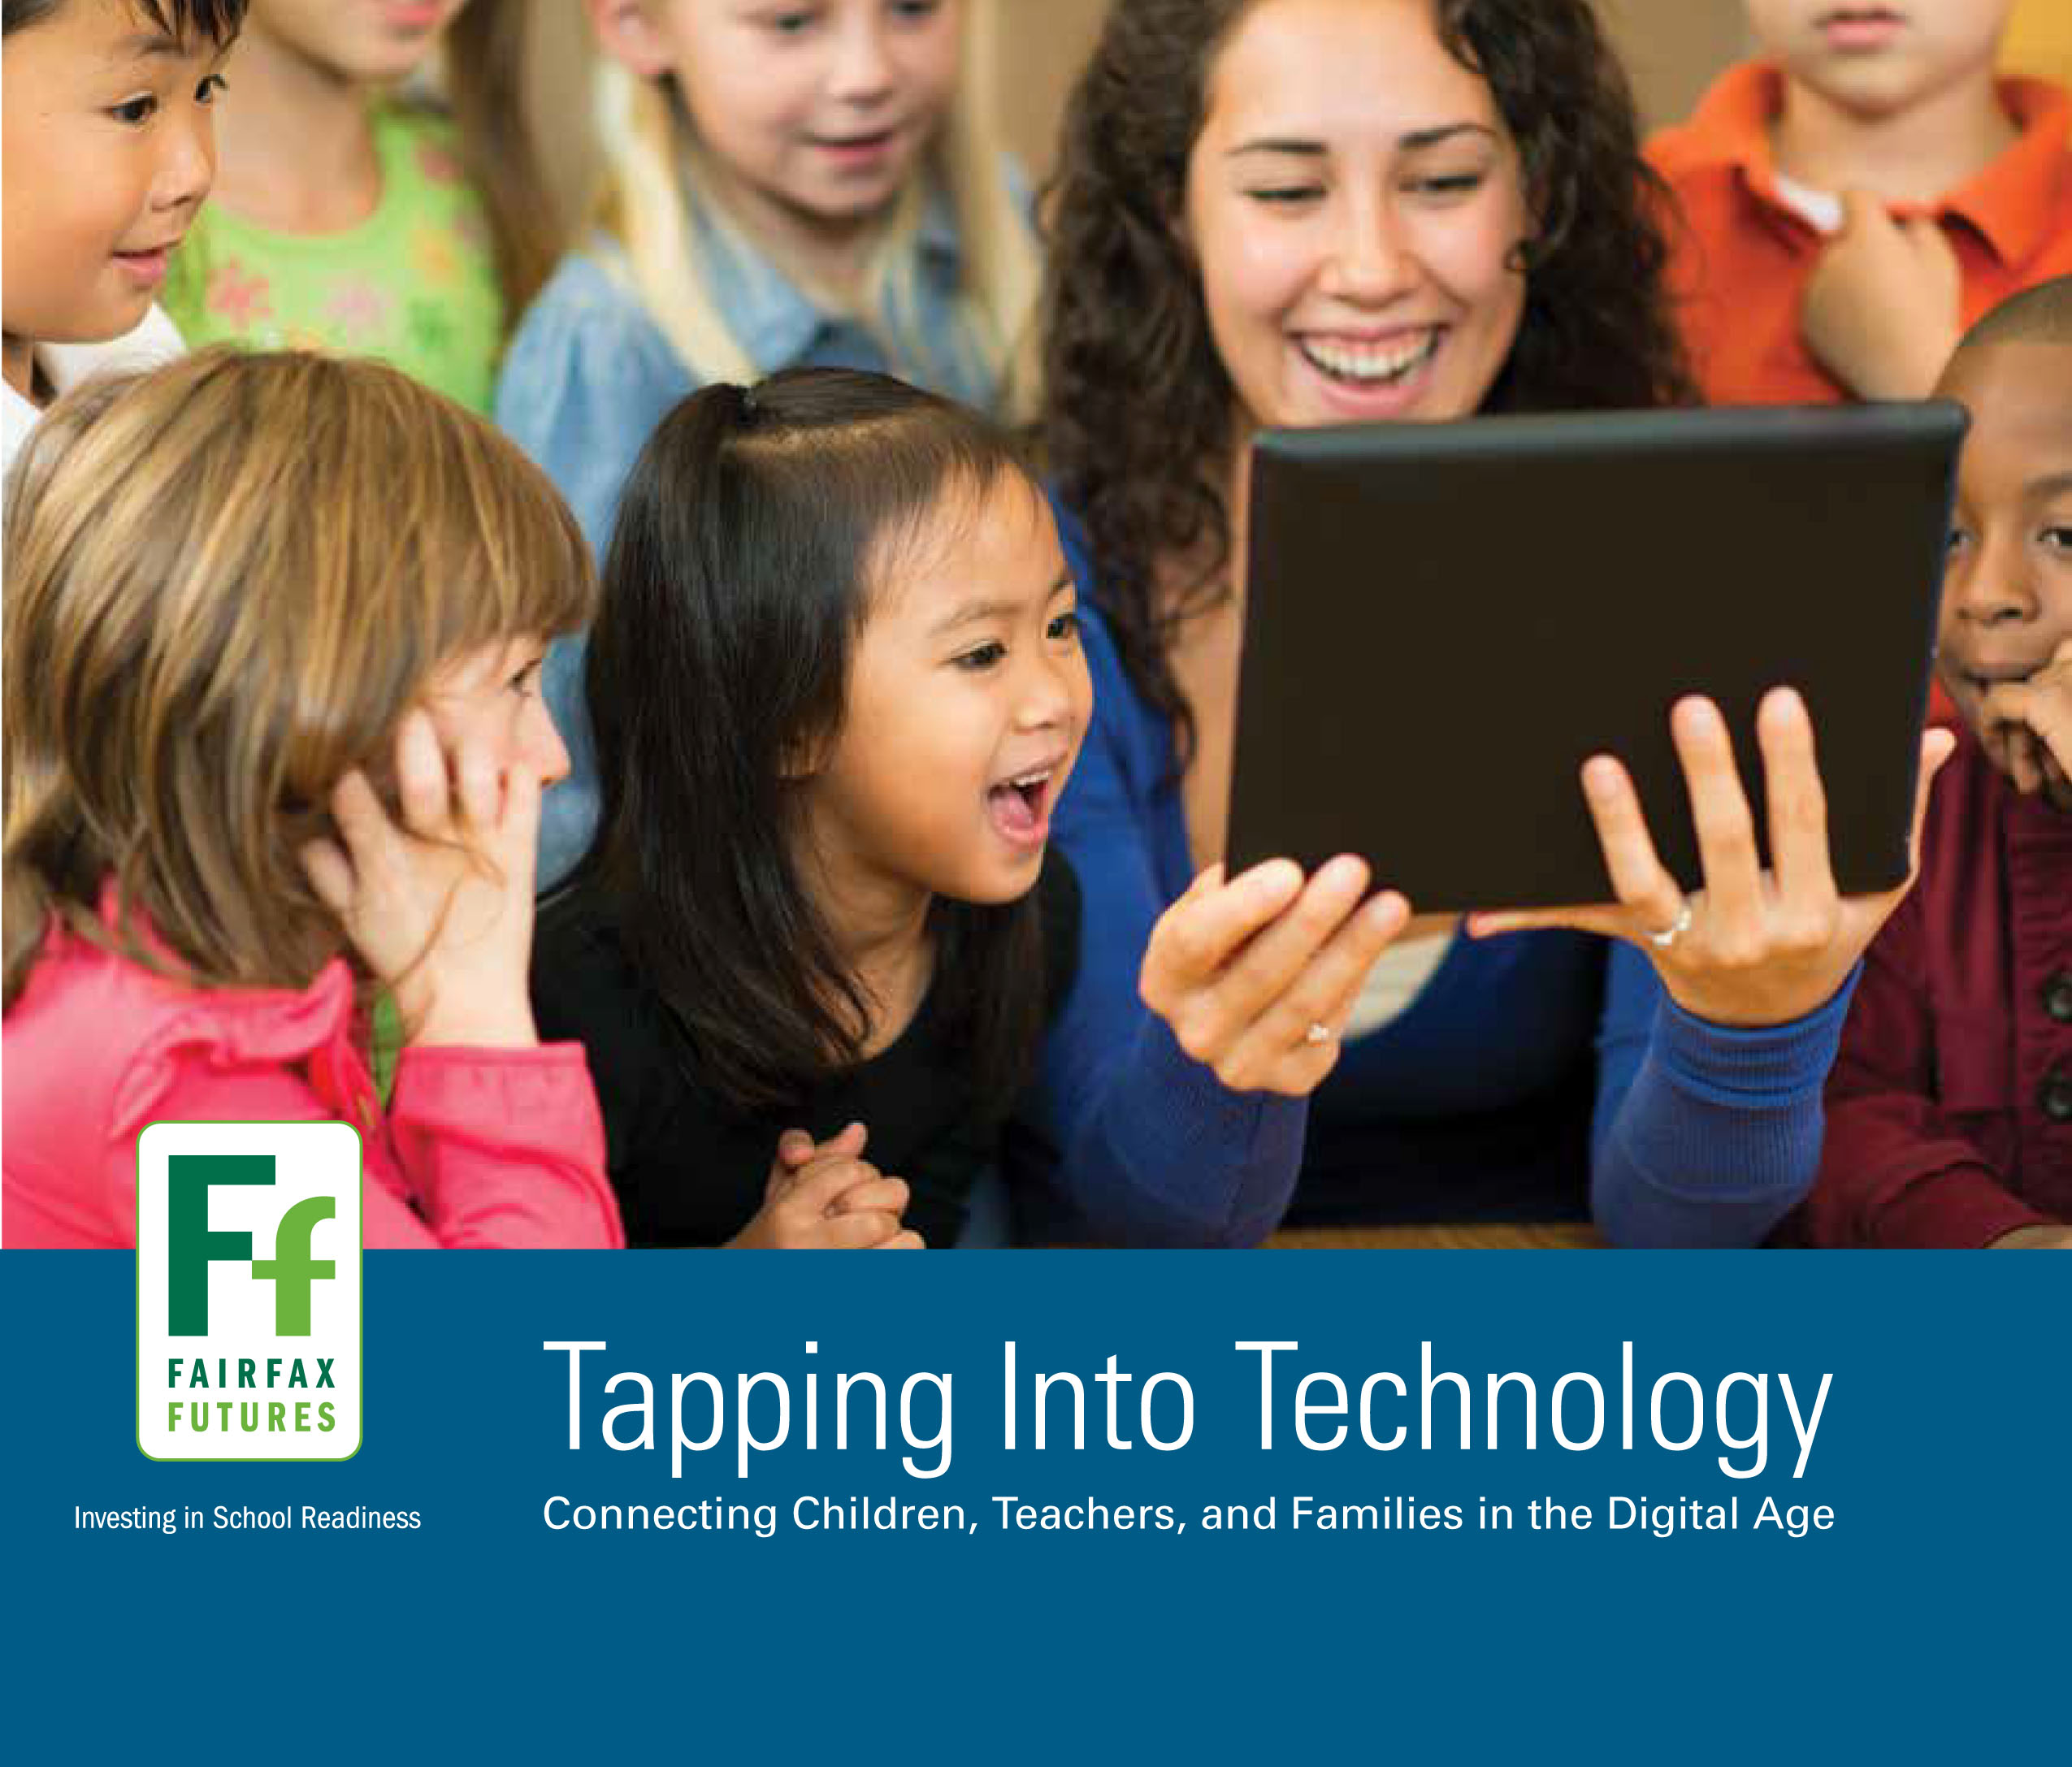 Tapping into Technology booklet